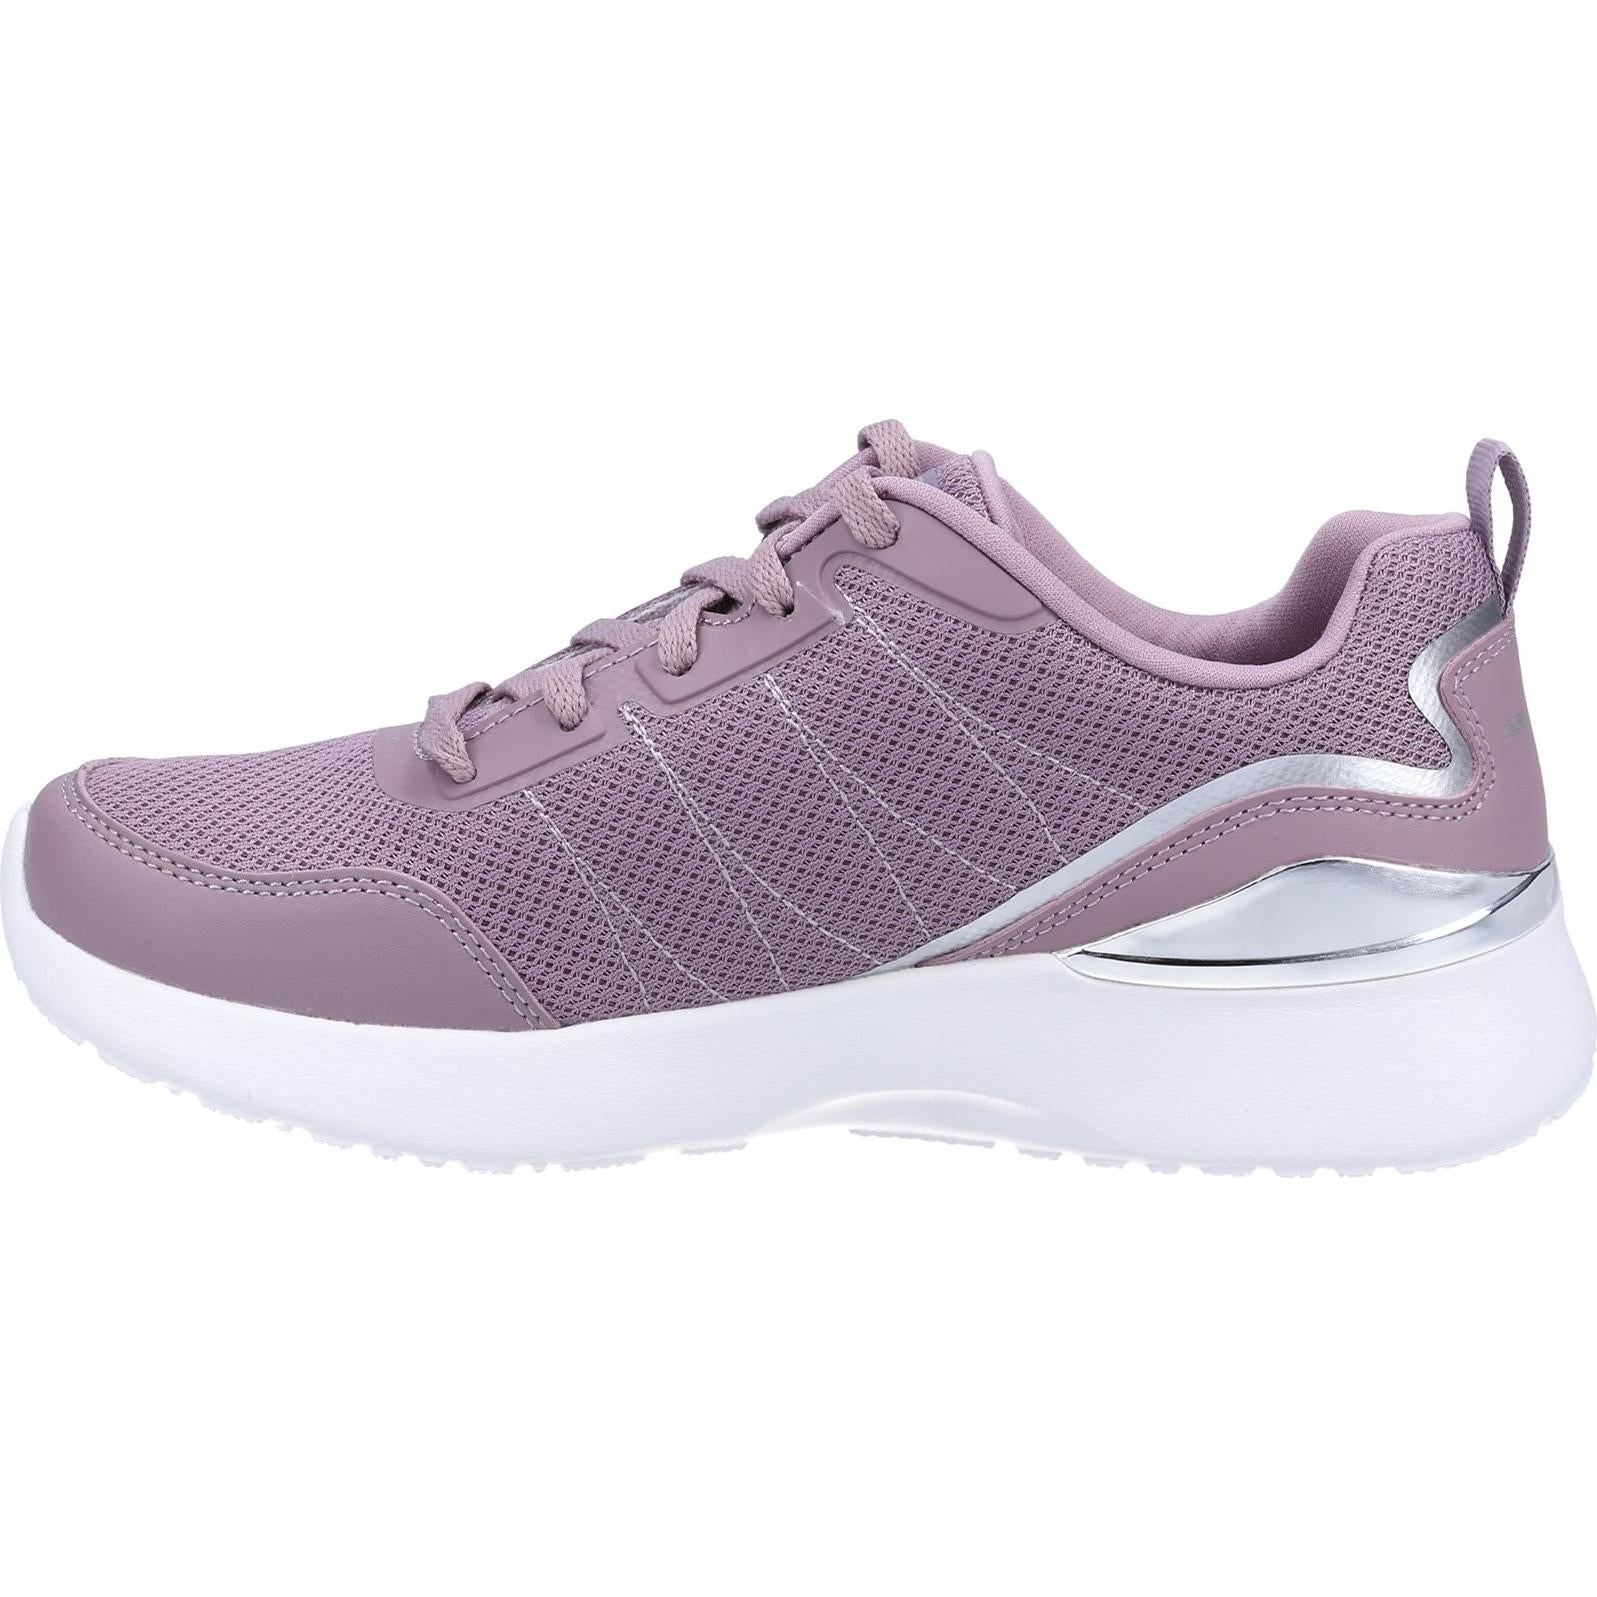 Skechers Skech-Air Dynamight The Halcyon Shoe